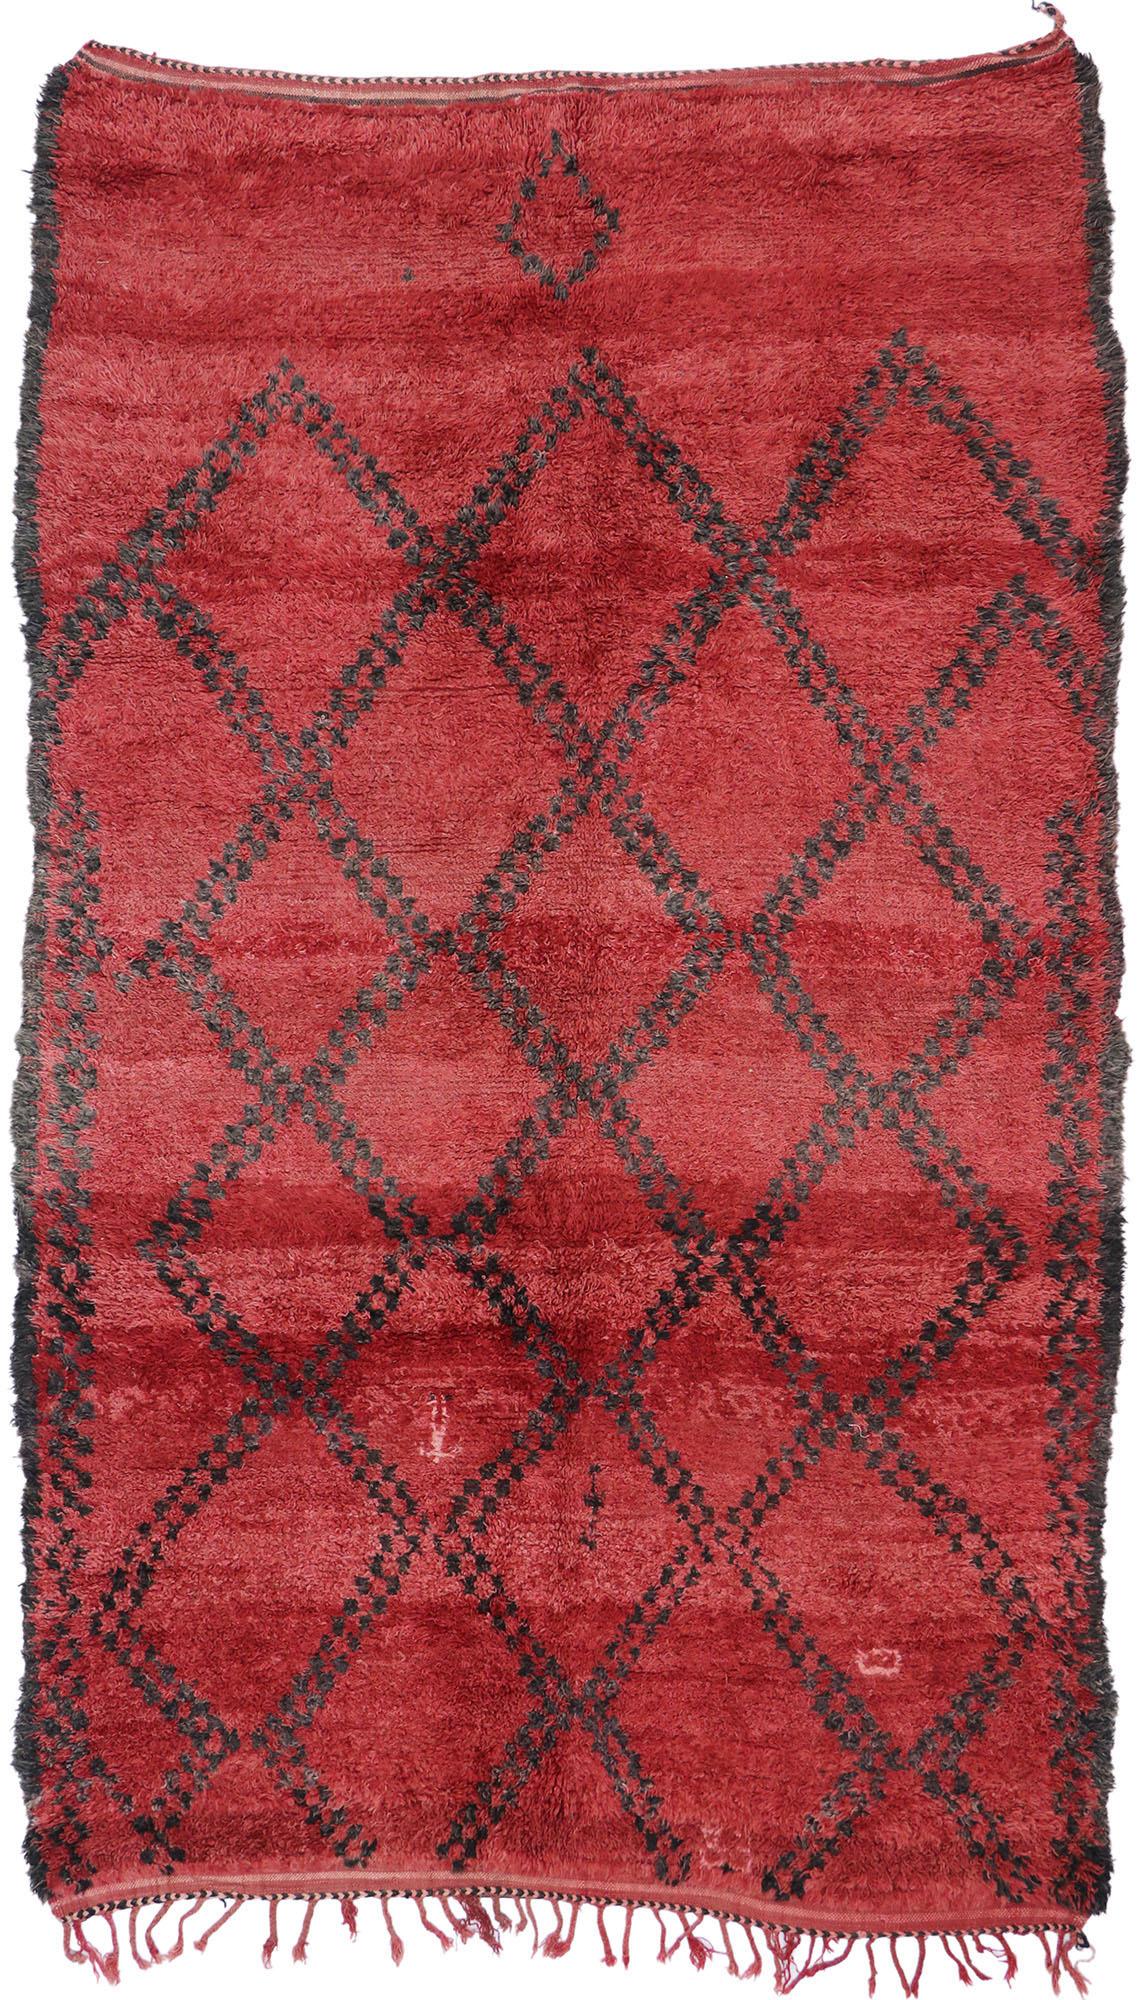 Vintage Berber Red Beni M'Guild Moroccan Rug with Modern Tribal Style For Sale 3